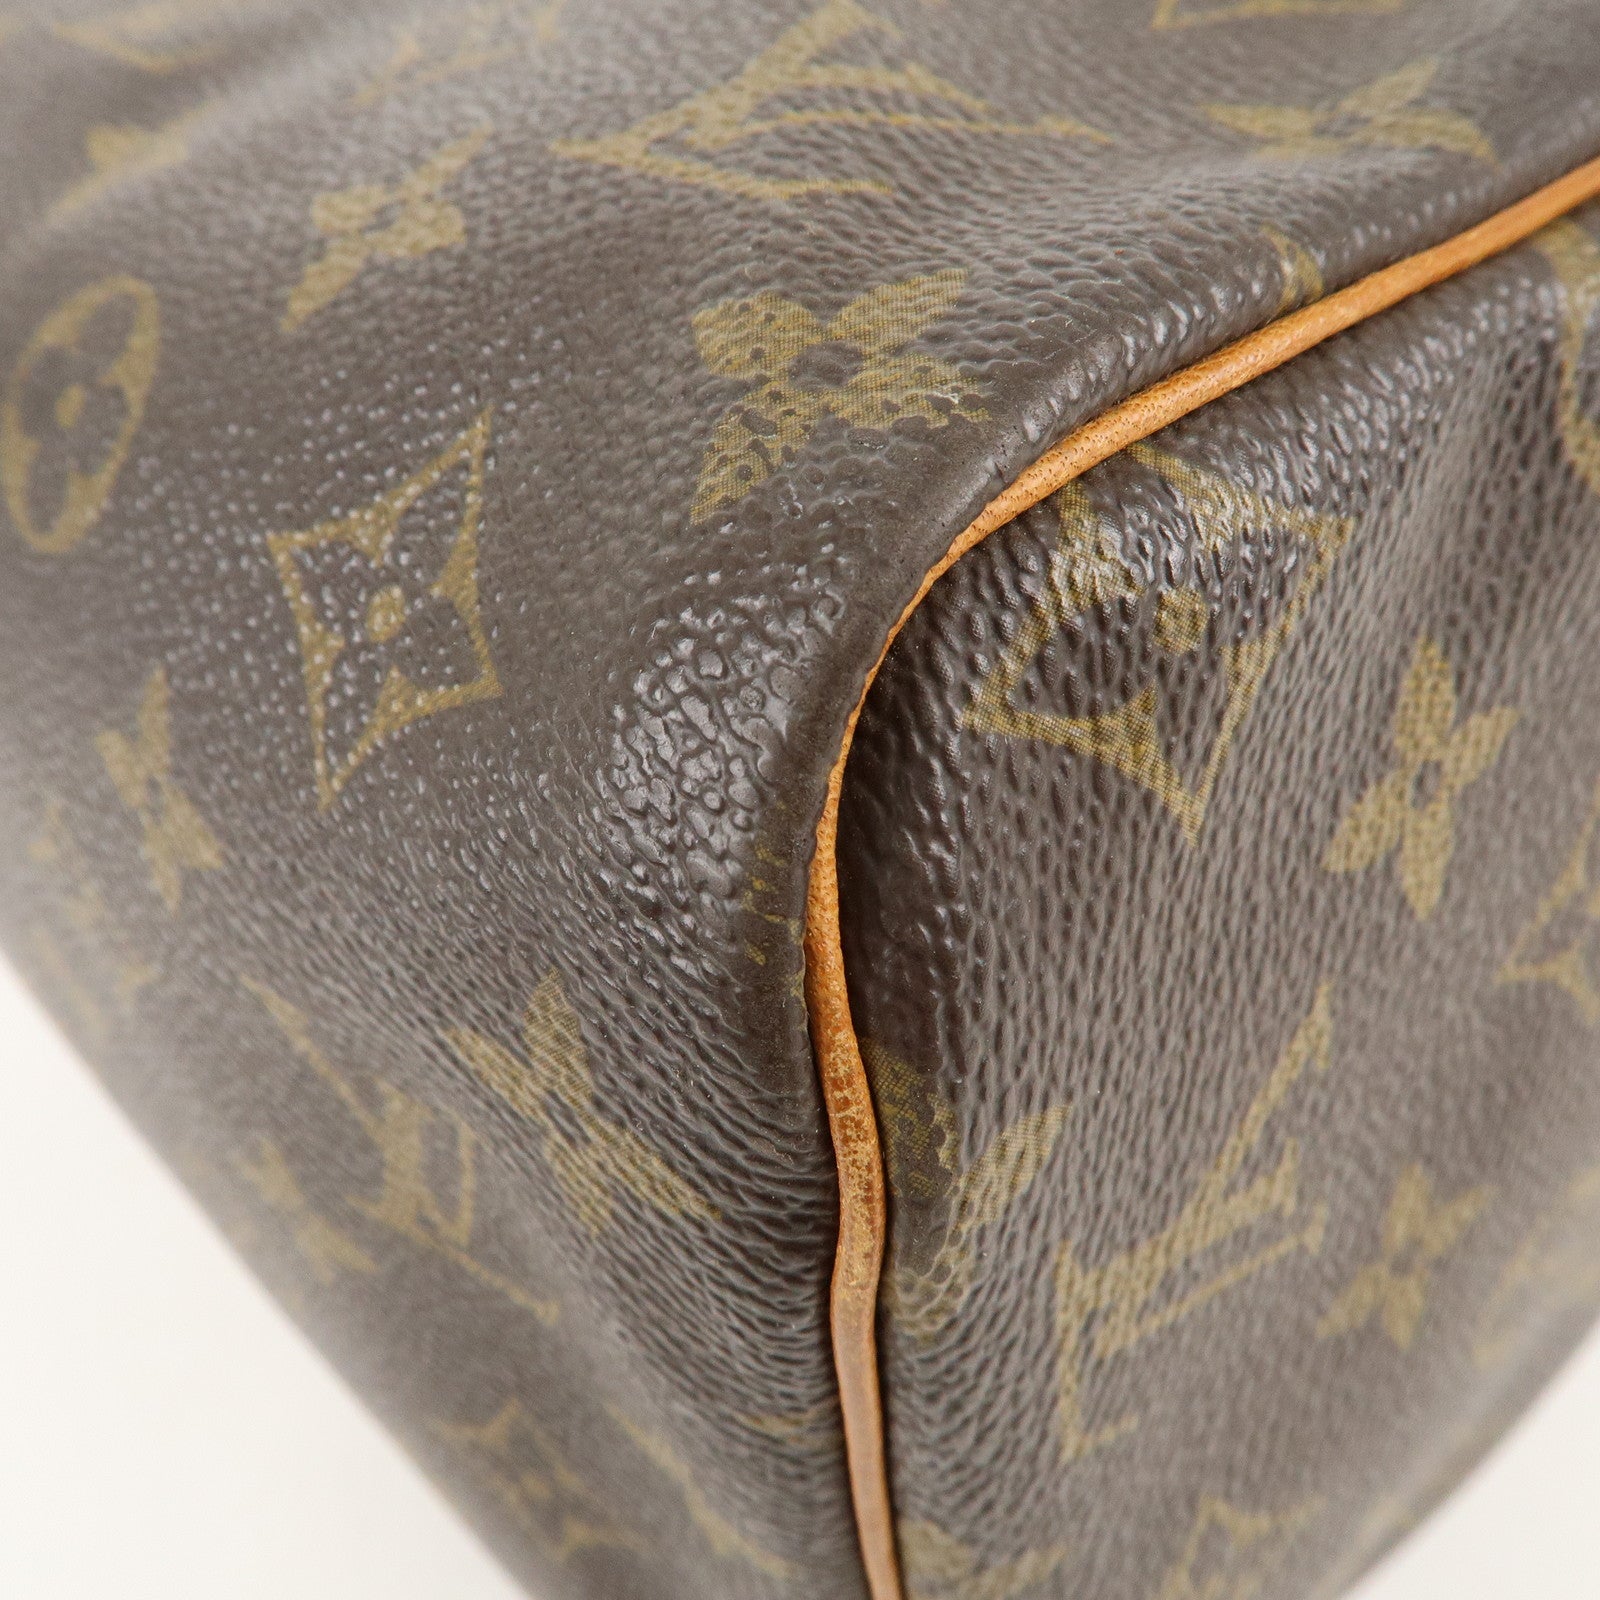 Buy Authentic Pre-owned Louis Vuitton Vintage Lv Monogram Speedy 30 Hand  Bag Duffle M41526 M41108 210077 from Japan - Buy authentic Plus exclusive  items from Japan